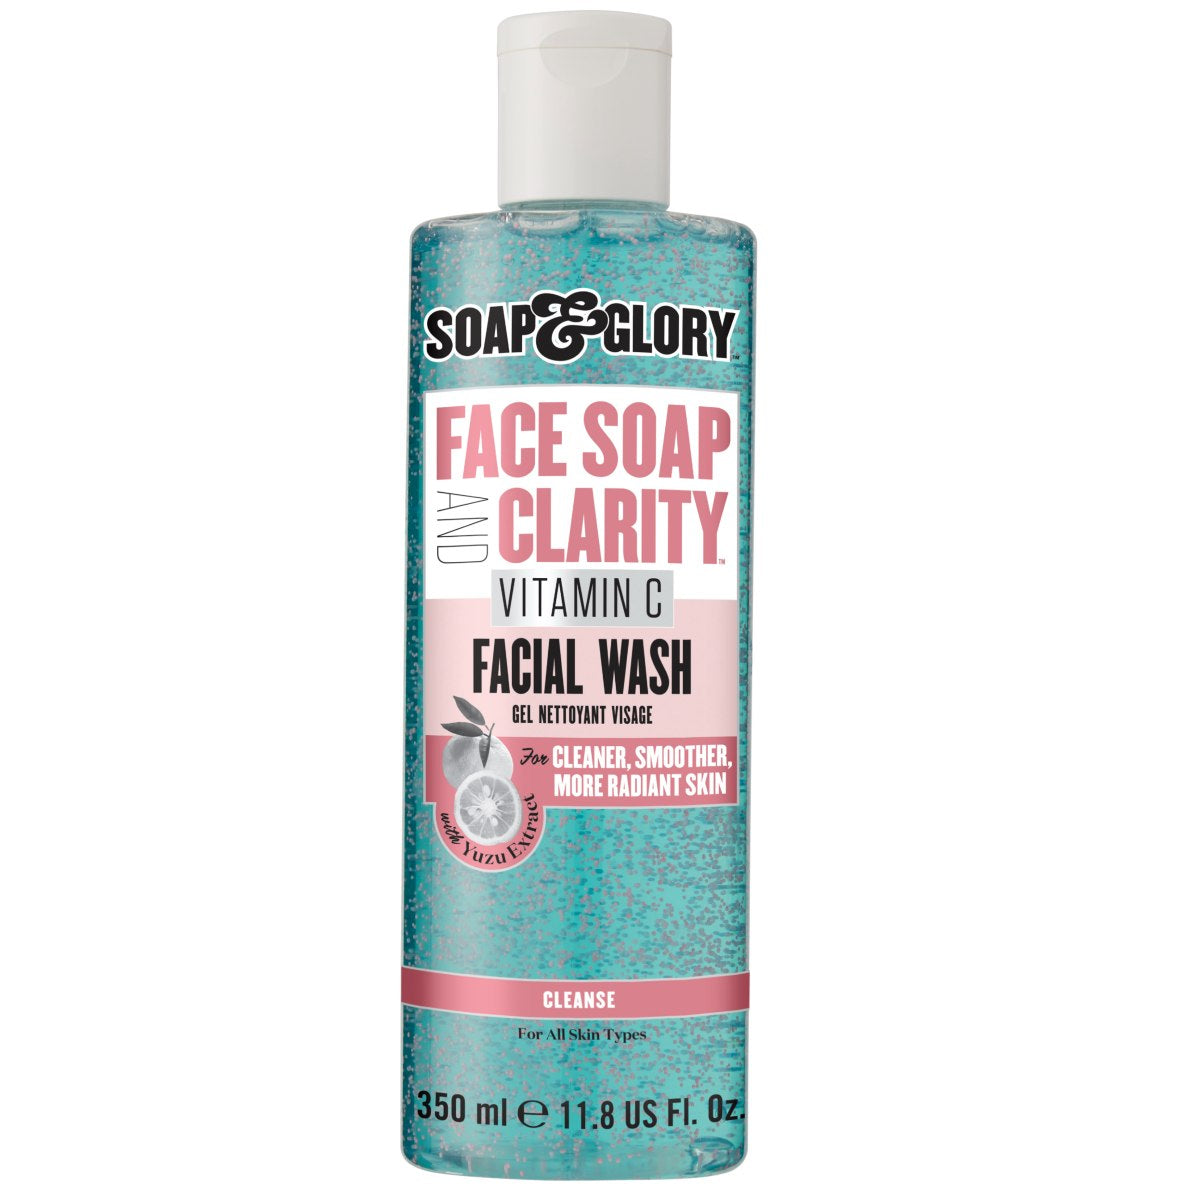 Soap and glory vitamin c face wash